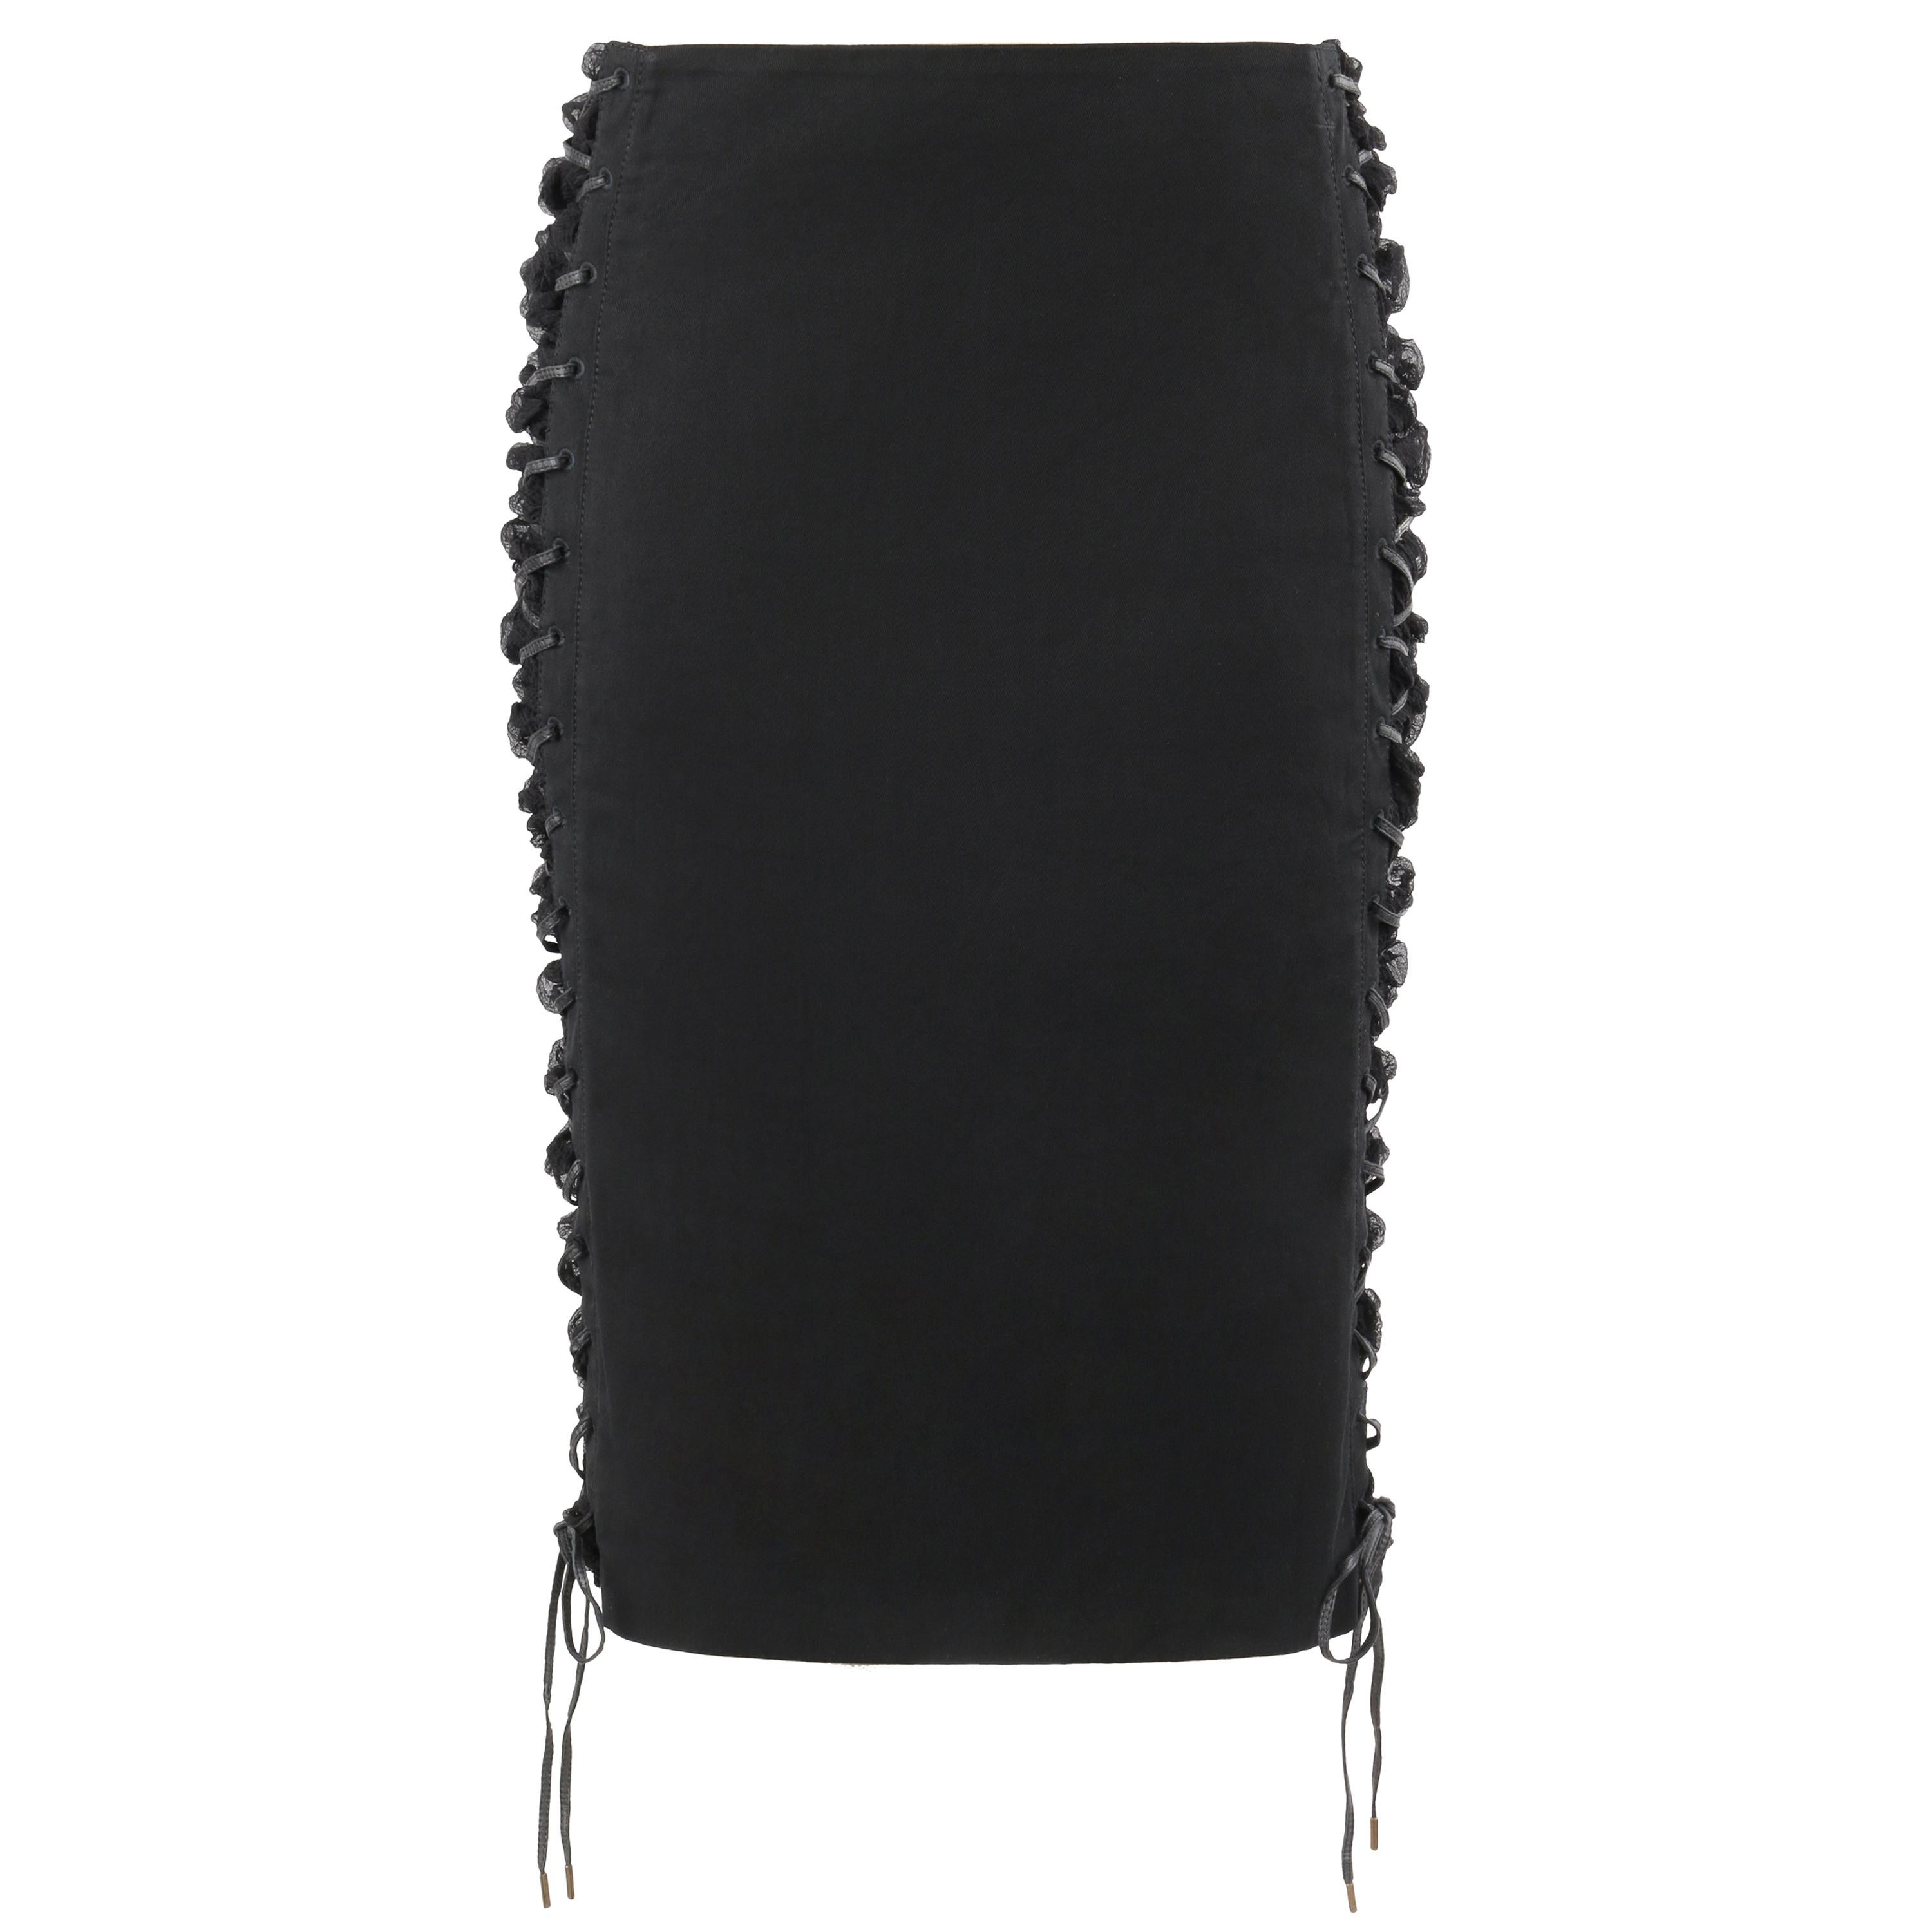 ALEXANDER McQUEEN A/W 2002 "Supercalifragilistic" Silk Lace Up Pencil Skirt For Sale